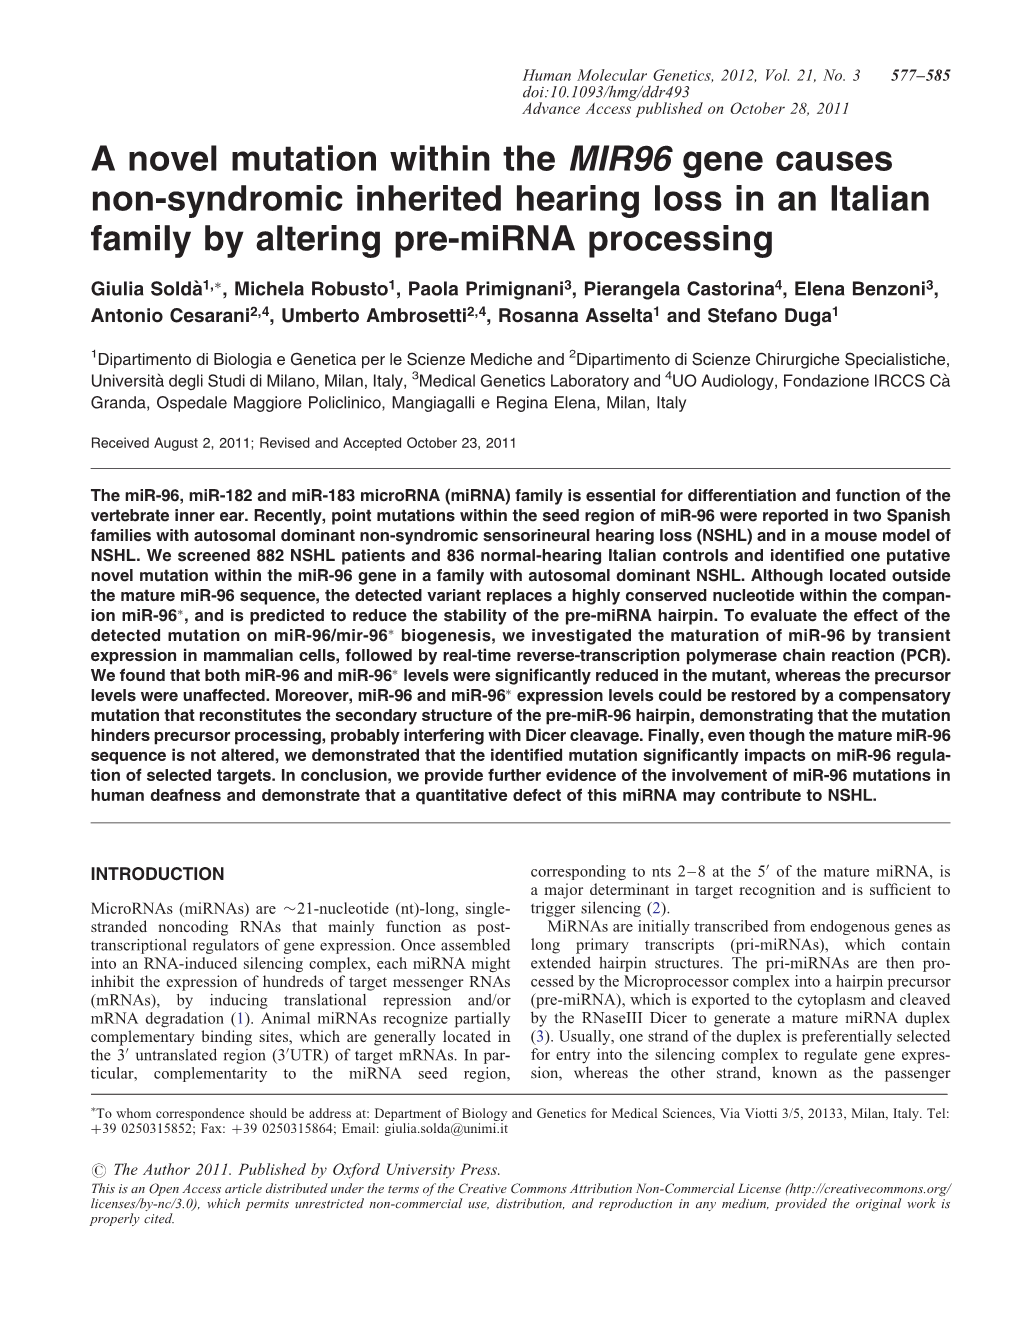 A Novel Mutation Within the MIR96 Gene Causes Non-Syndromic Inherited Hearing Loss in an Italian Family by Altering Pre-Mirna Processing